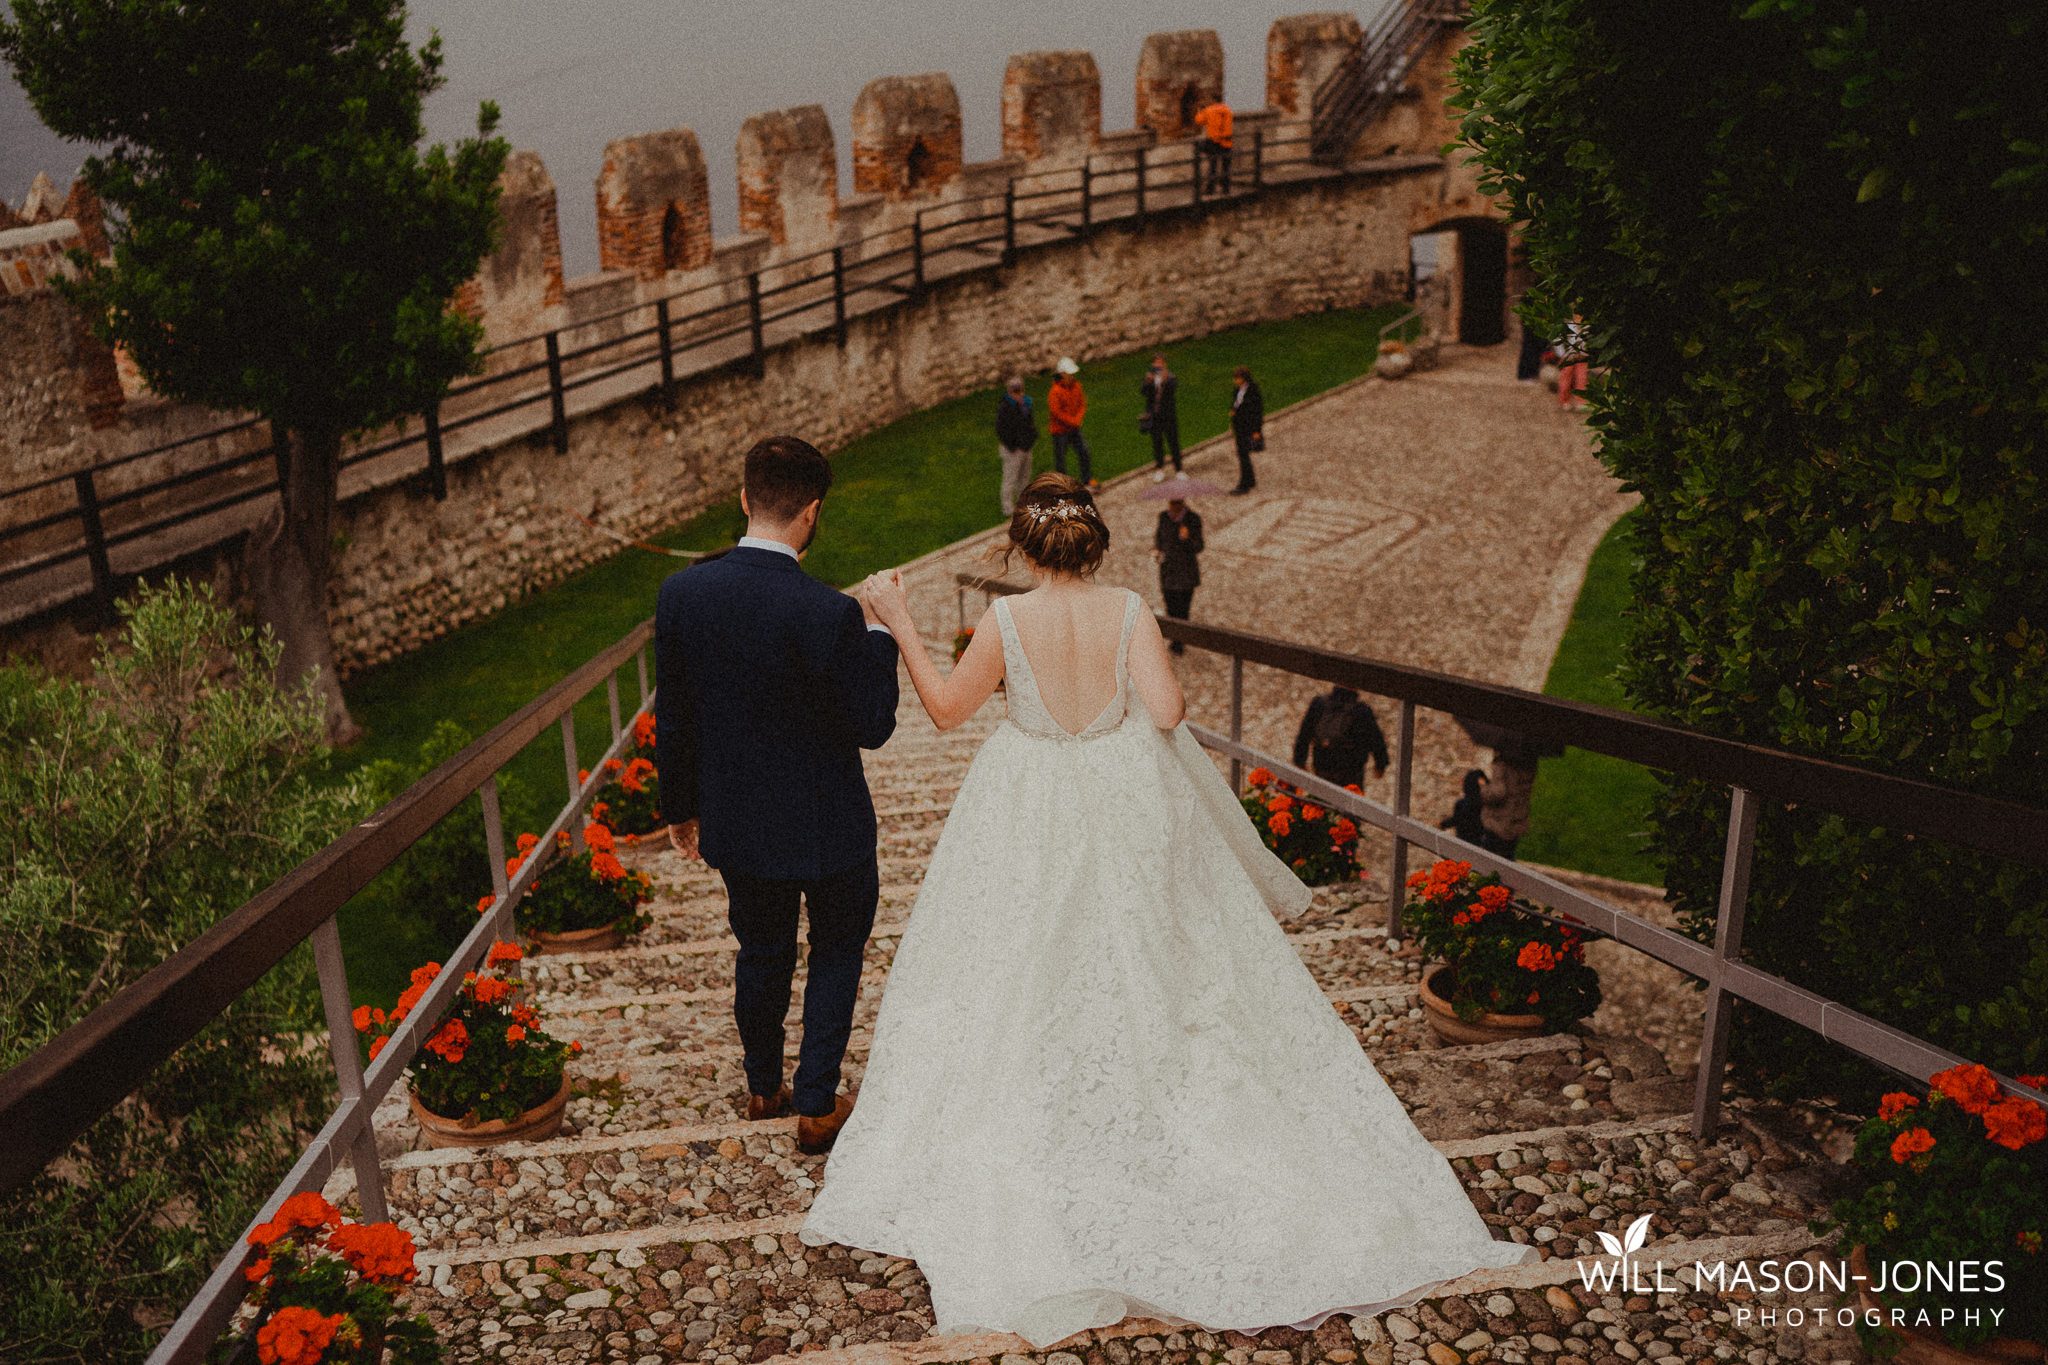  colourful rainy wet outdoor destination wedding ceremony at malcesine castle photography 